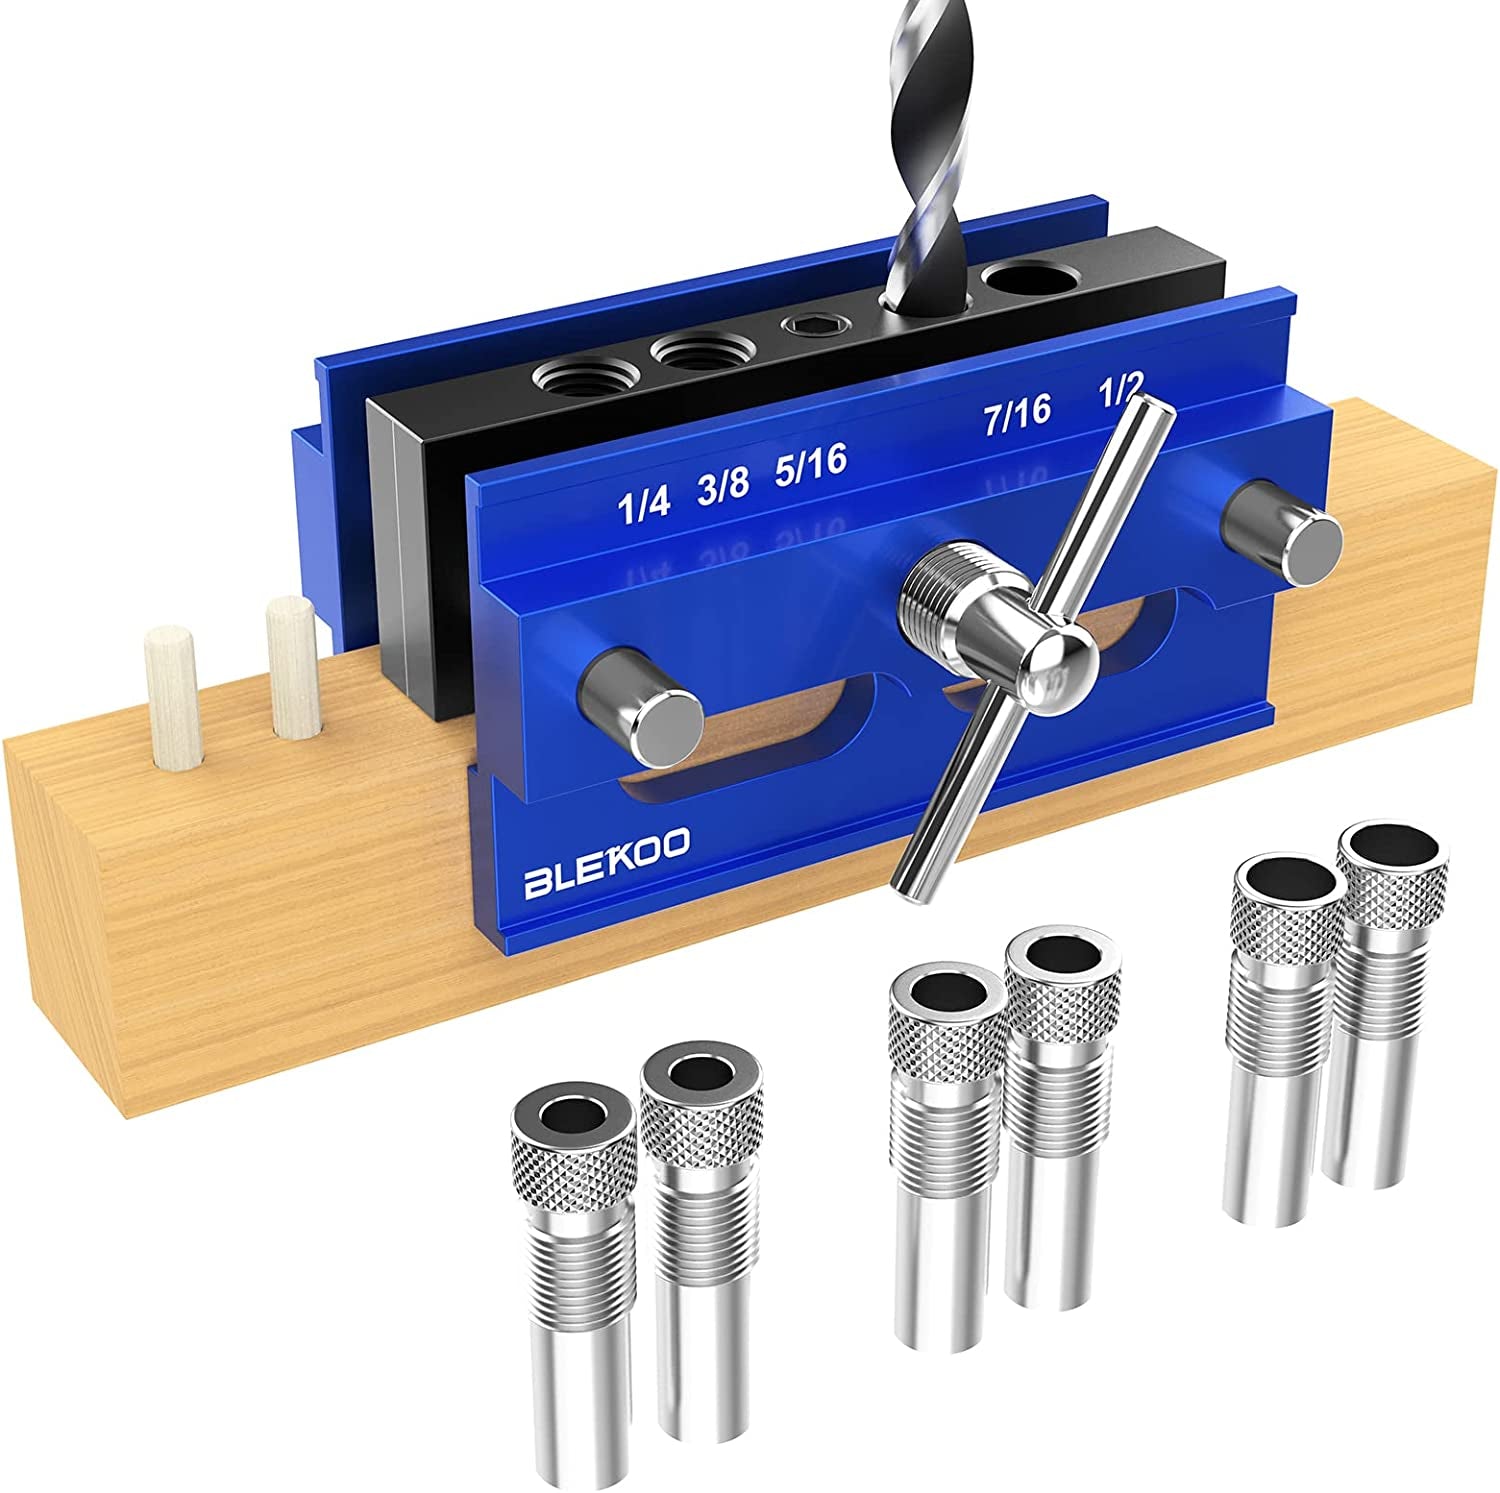 Self Centering Doweling Jig Kit, Drill Jig for Straight Holes Biscuit Joiner Set with 6 Drill Guide Bushings, Adjustable Width Drilling Guide Power Tool Accessory Jigs (Blue)